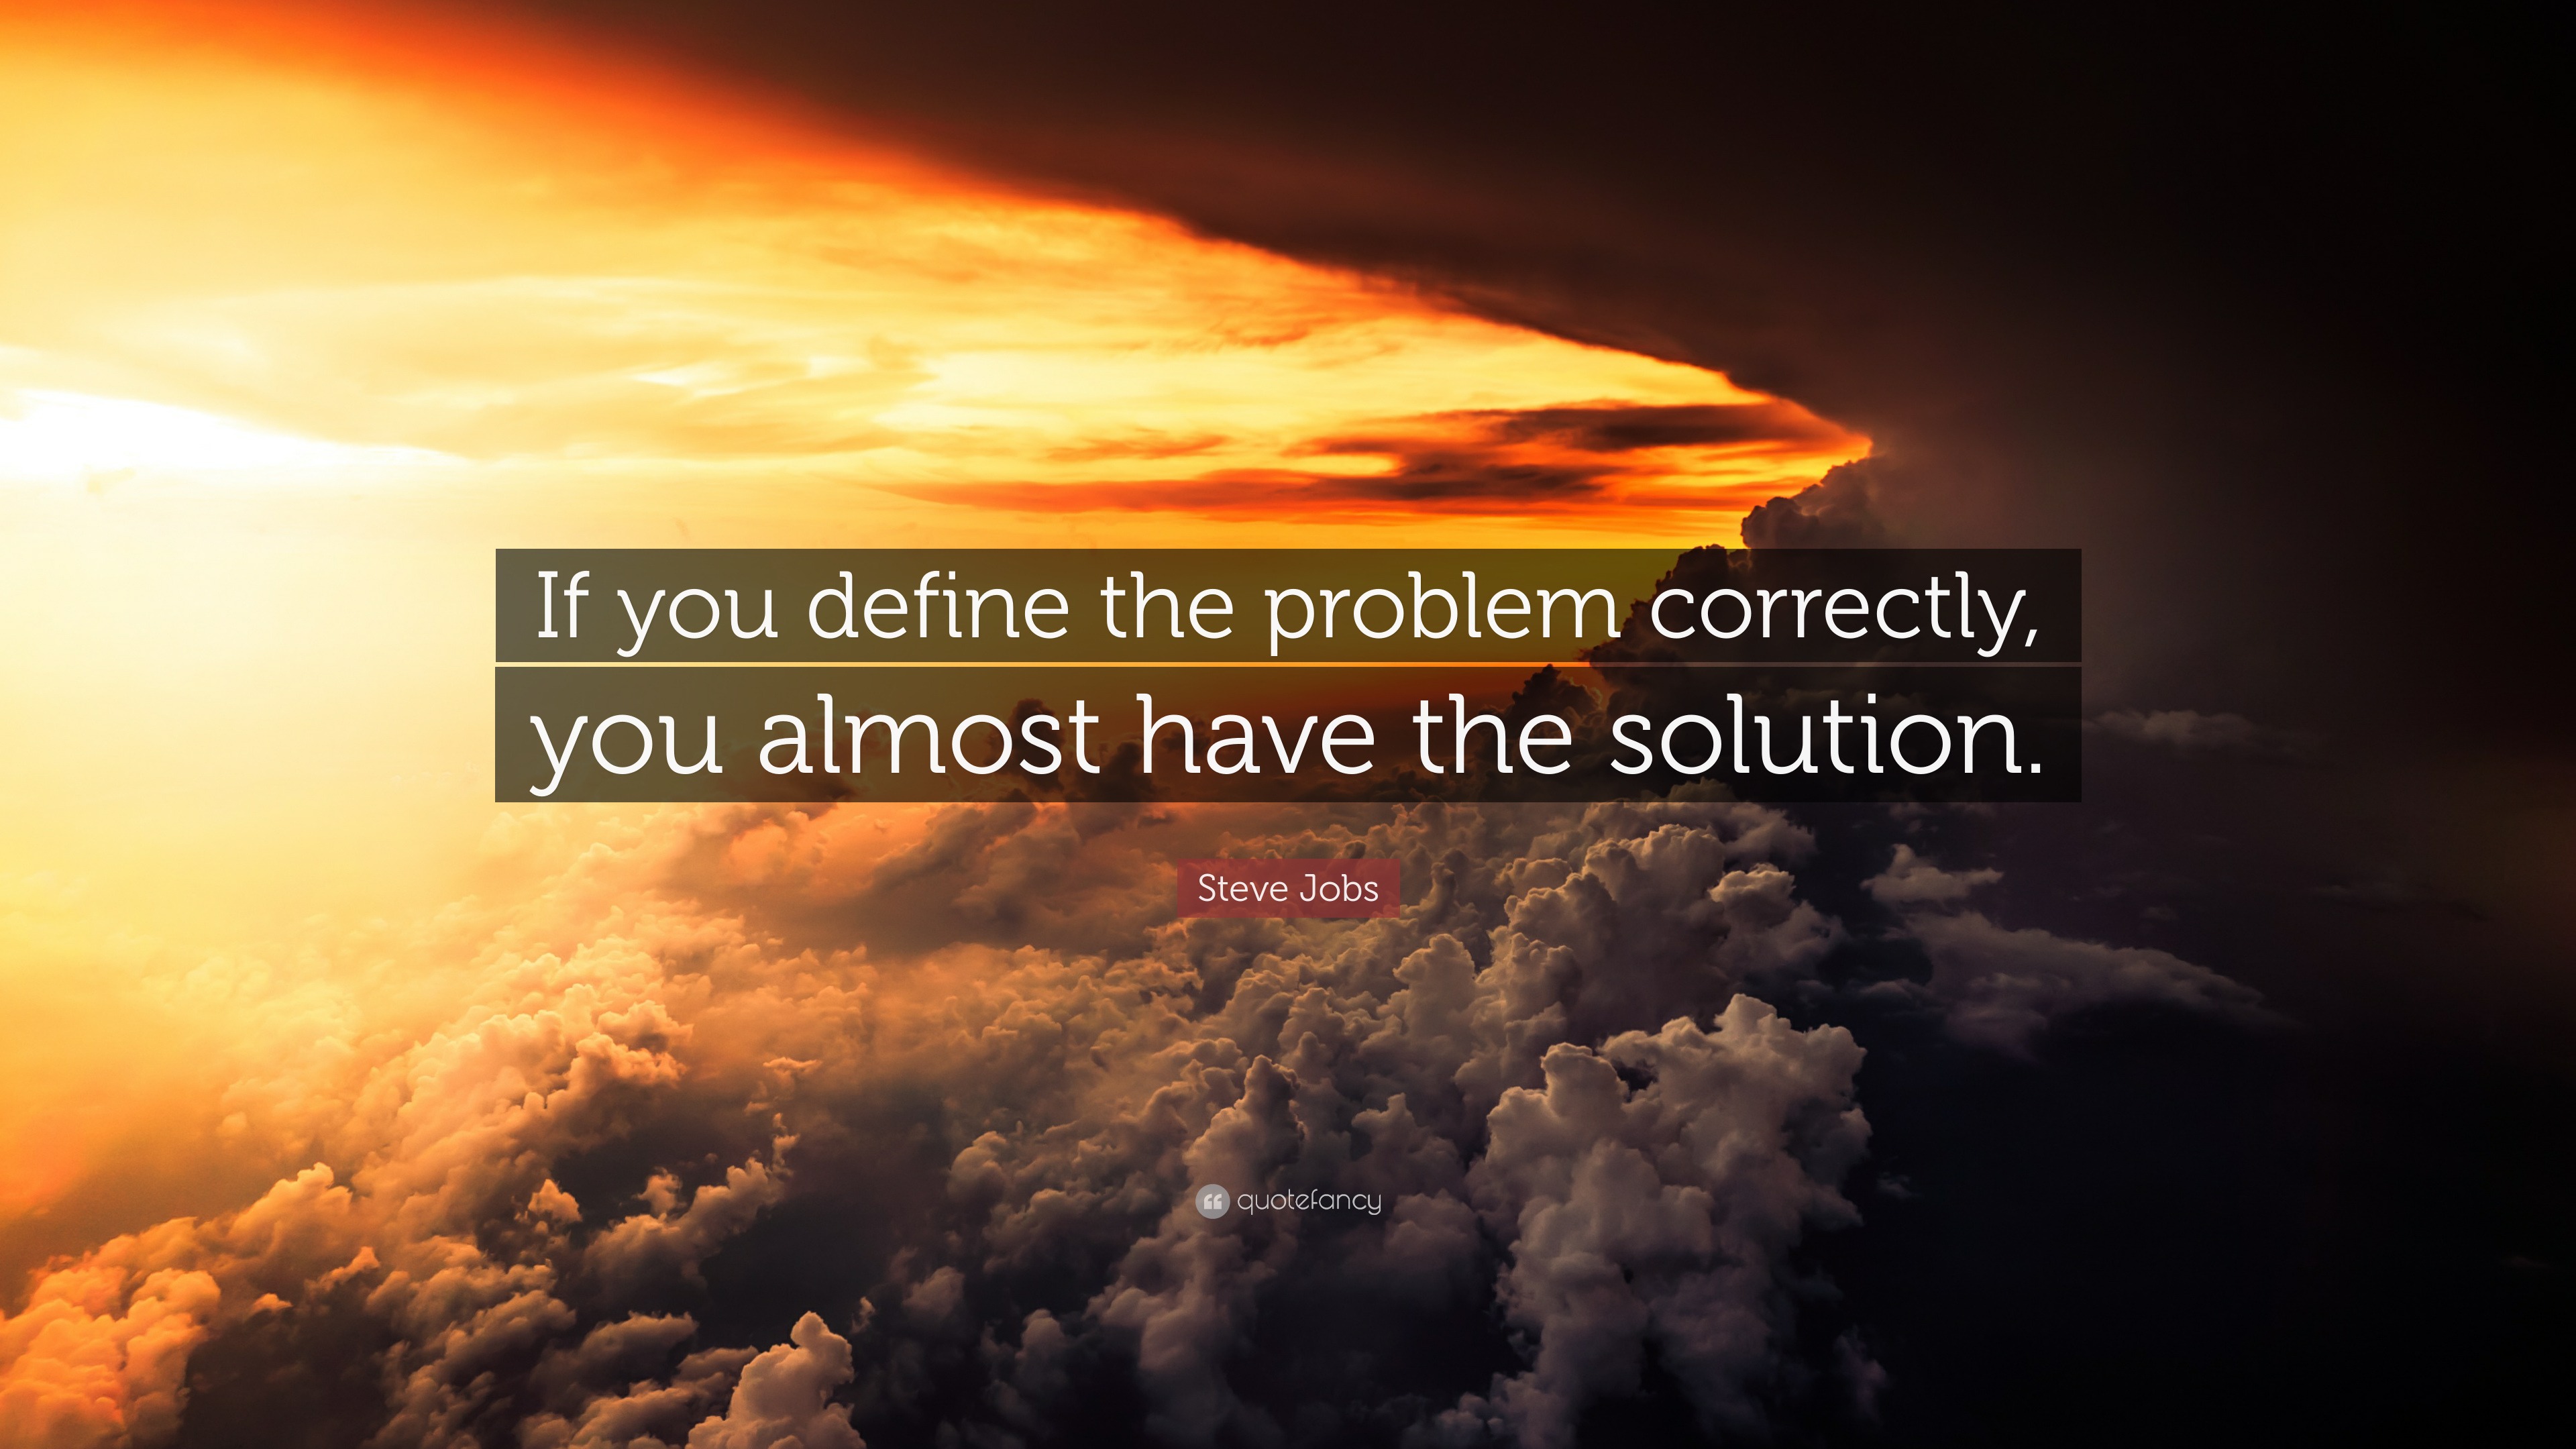 https://quotefancy.com/media/wallpaper/3840x2160/4701454-Steve-Jobs-Quote-If-you-define-the-problem-correctly-you-almost.jpg